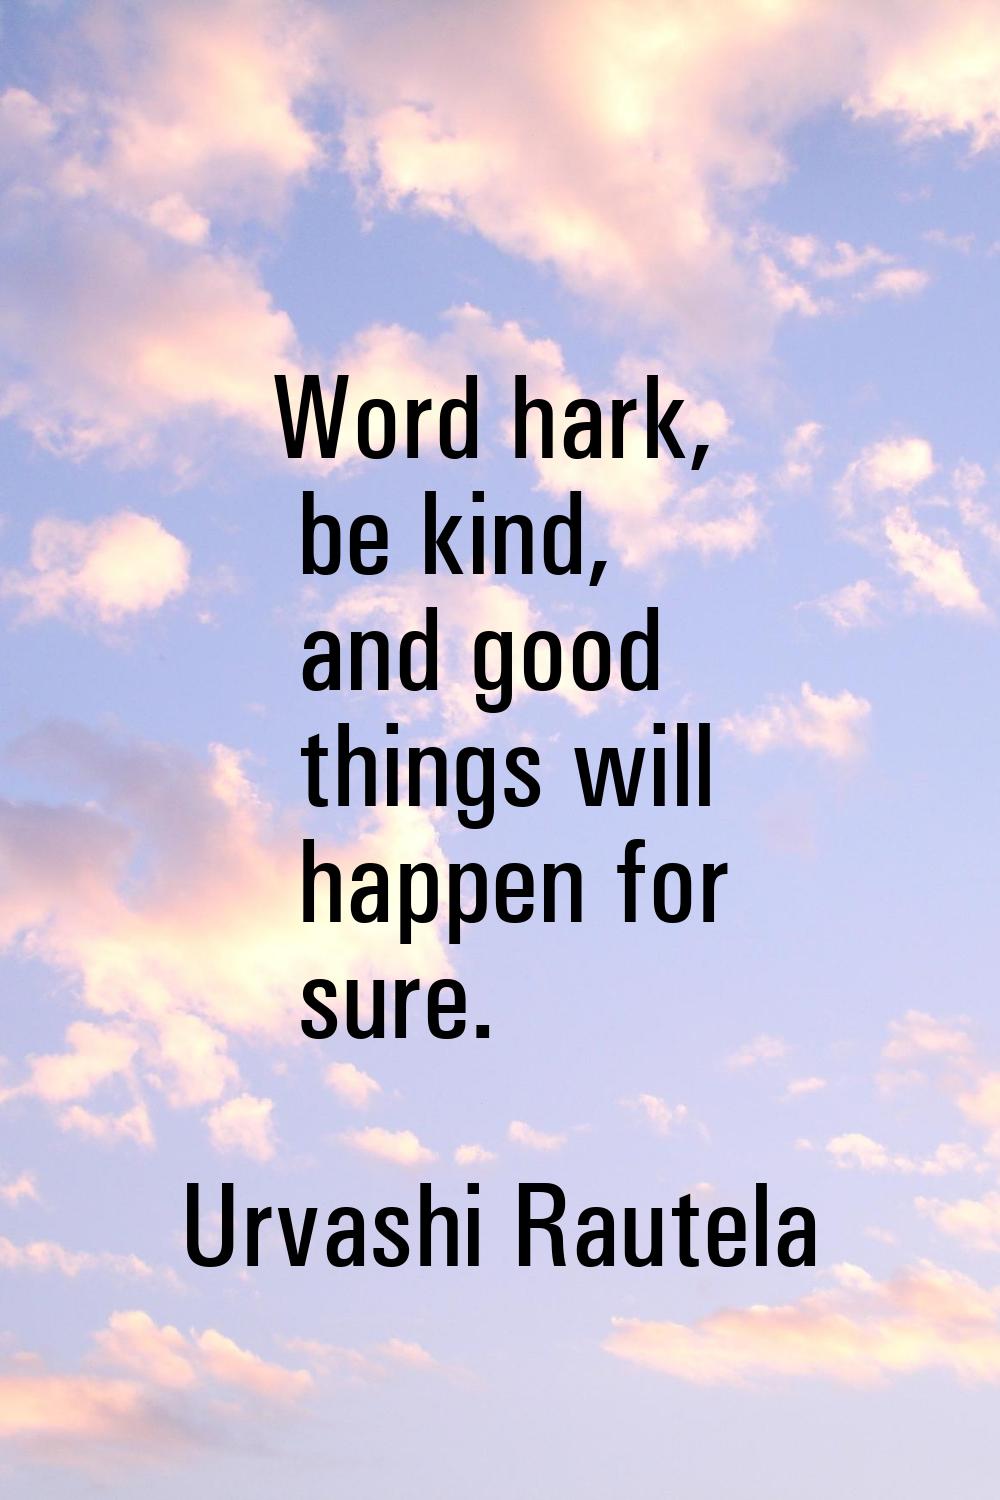 Word hark, be kind, and good things will happen for sure.